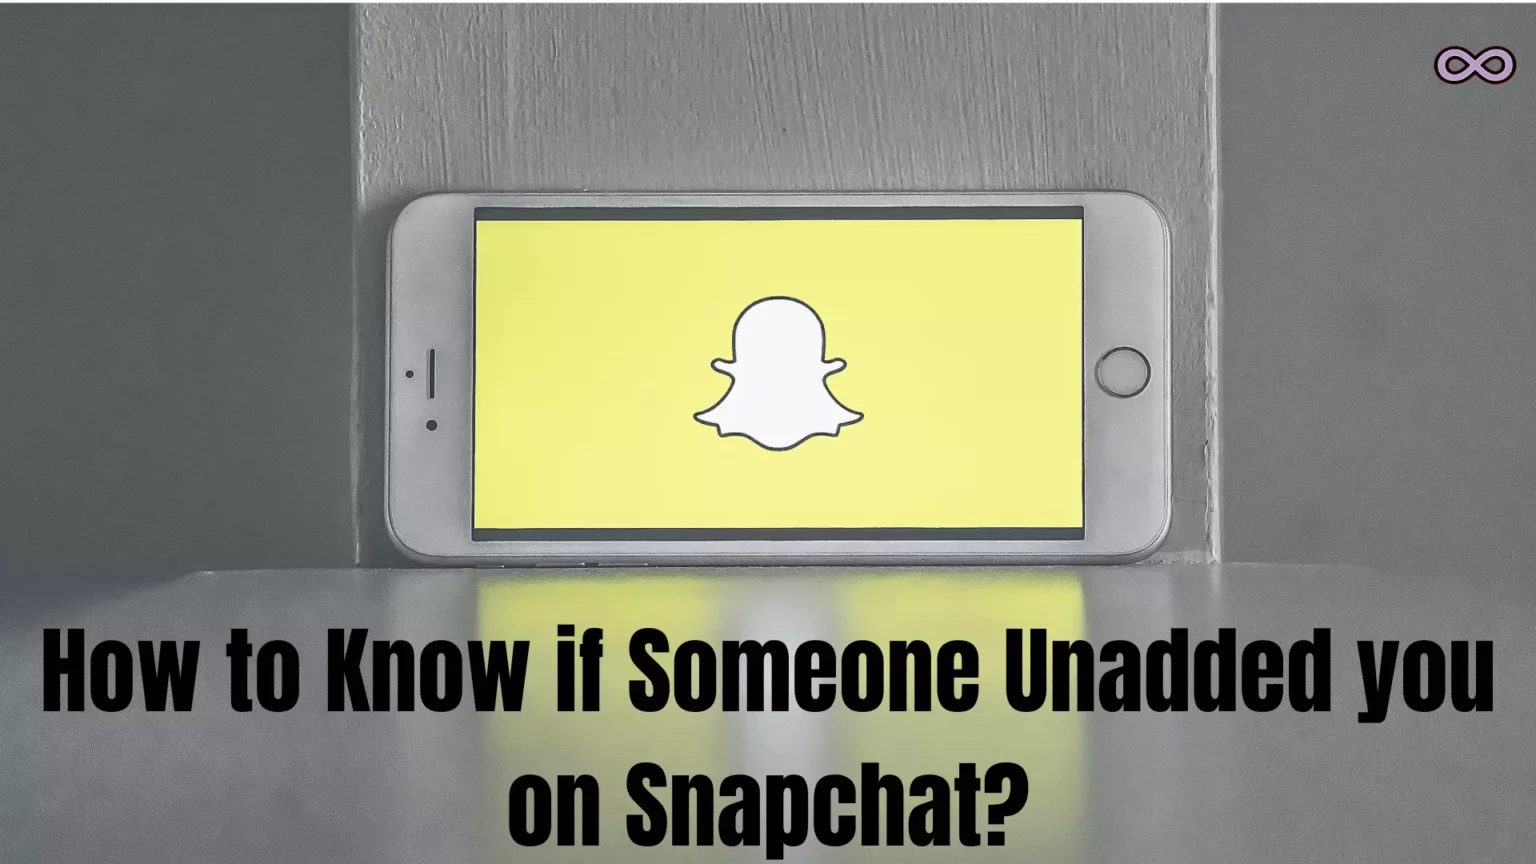 How to Tell if Someone Unadded you on Snapchat?